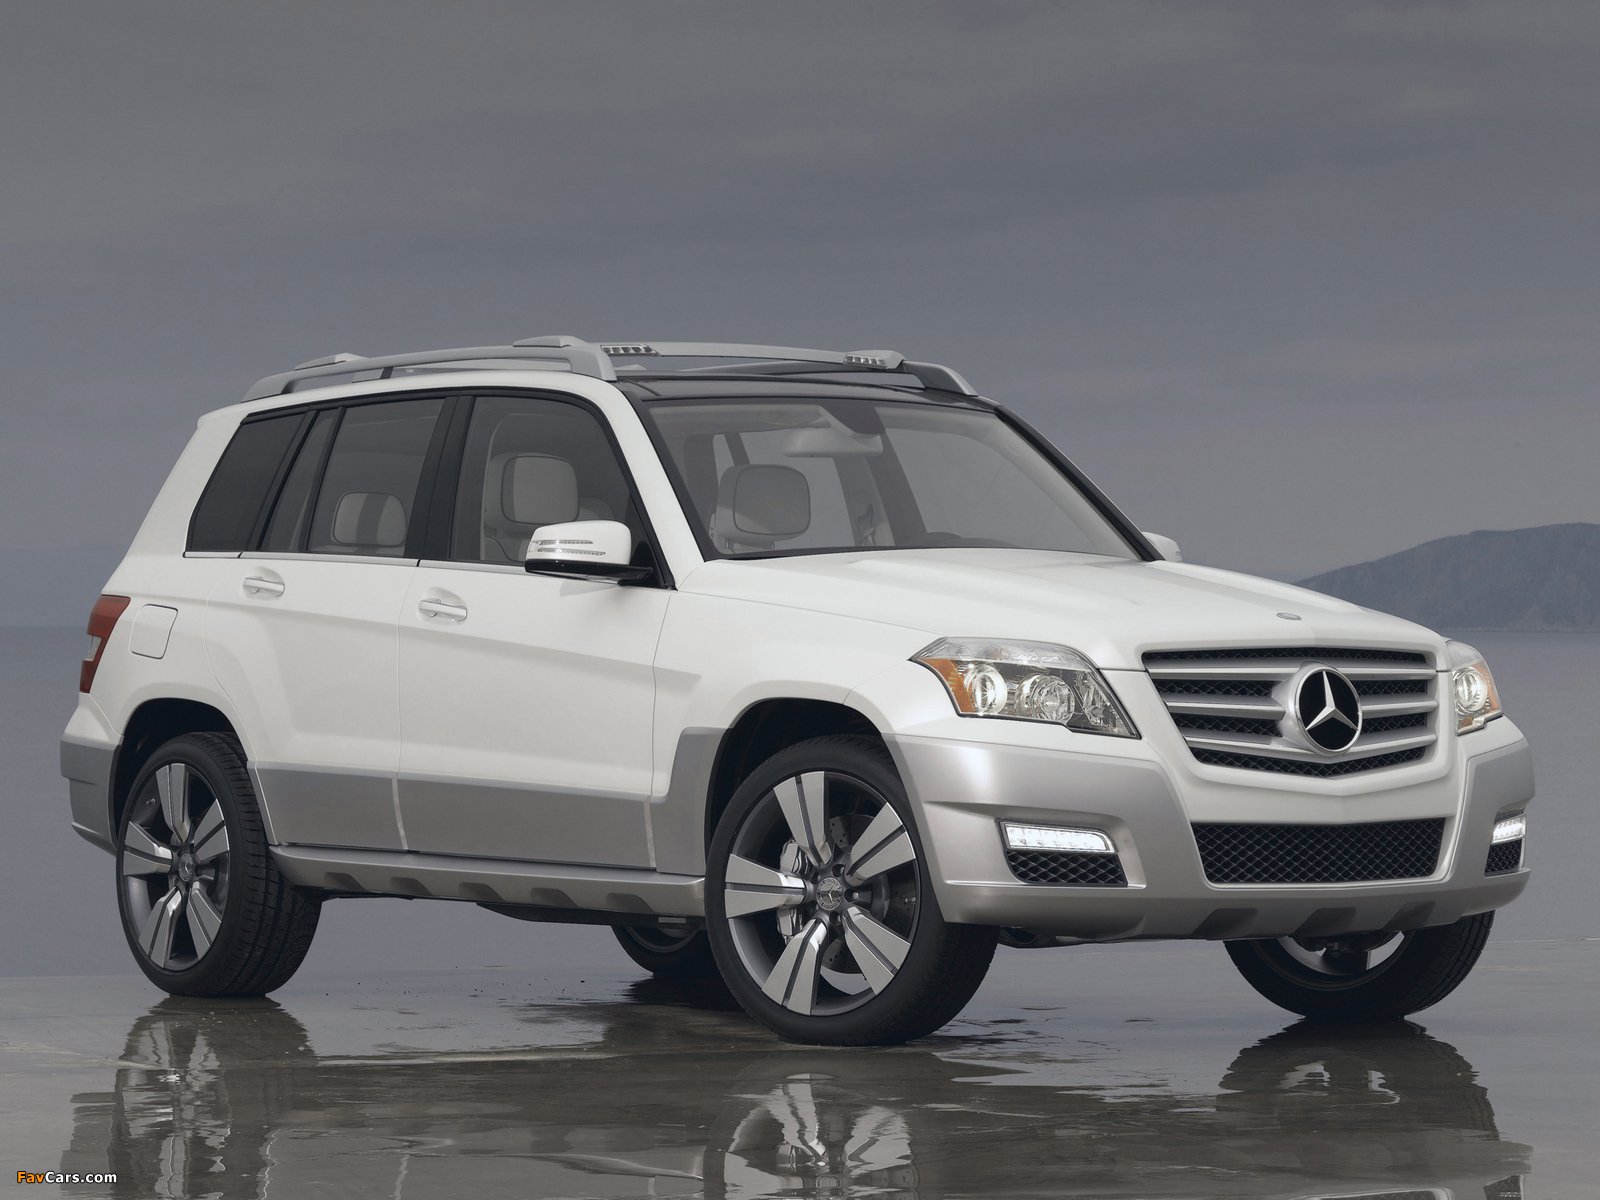 Mercedes-Benz Vision GLK Freeside Concept (X204) 2008 wallpapers (1600 x 1200)